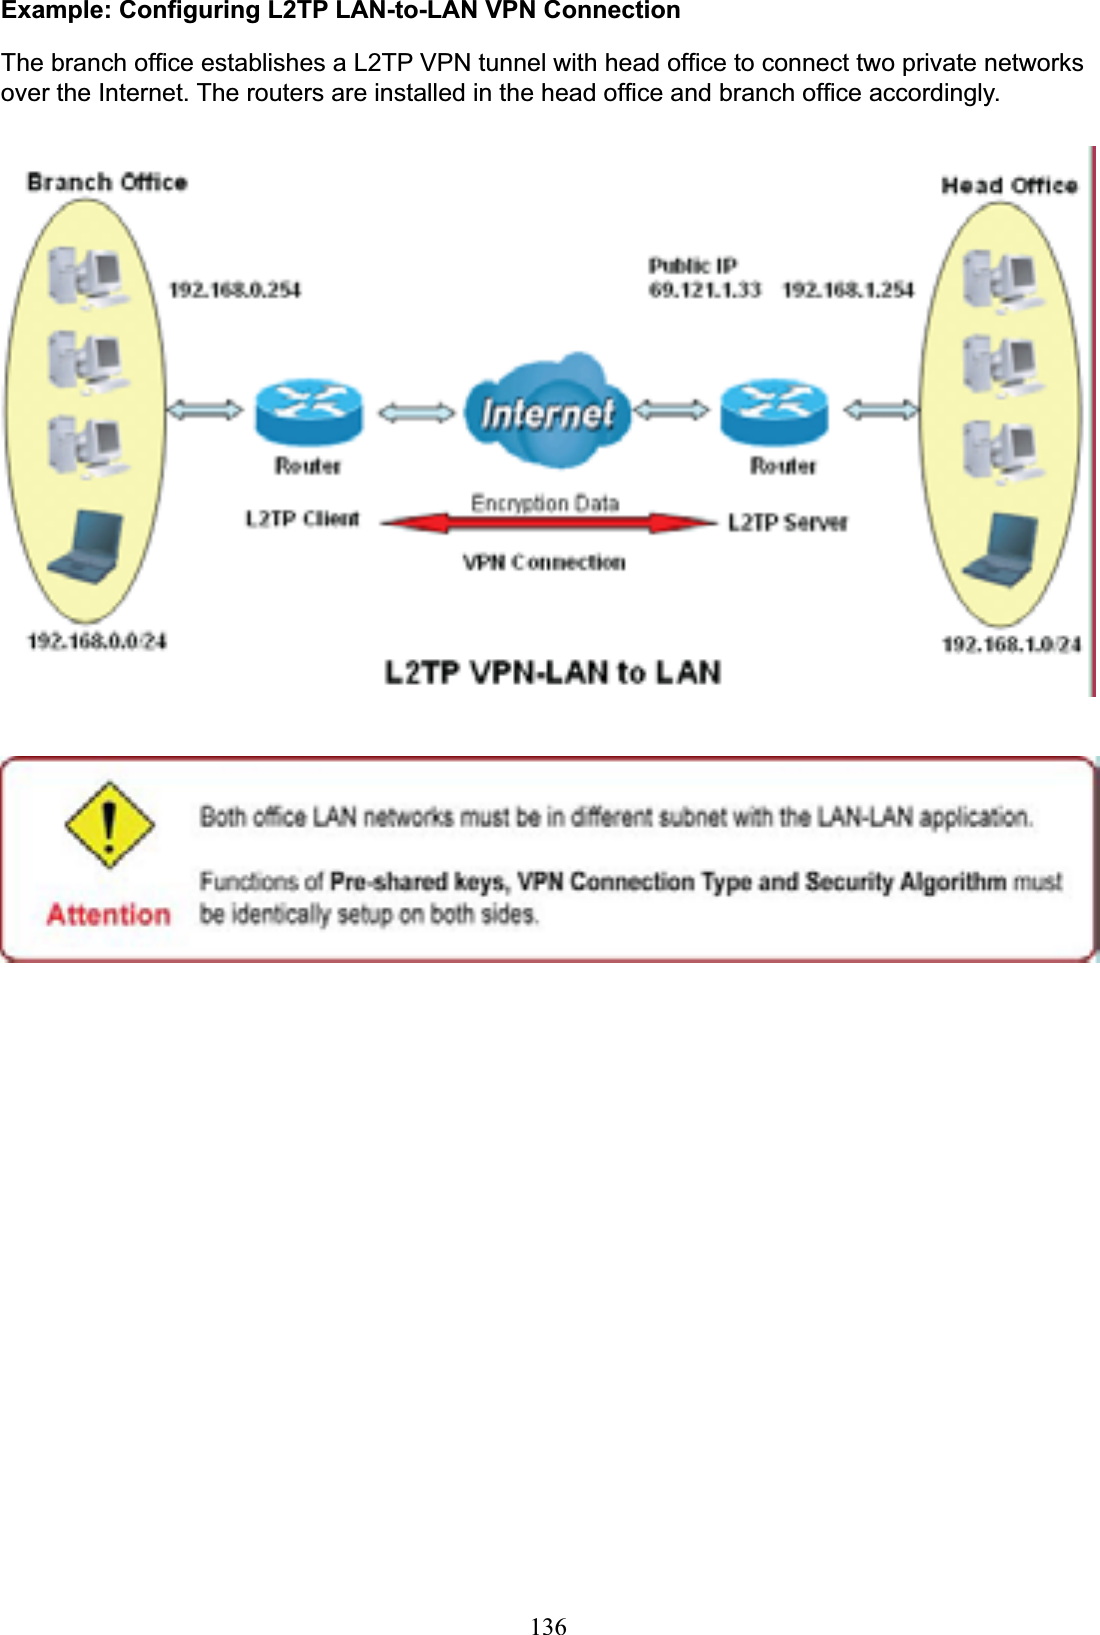 136Example: Configuring L2TP LAN-to-LAN VPN ConnectionThe branch office establishes a L2TP VPN tunnel with head office to connect two private networks over the Internet. The routers are installed in the head office and branch office accordingly. 